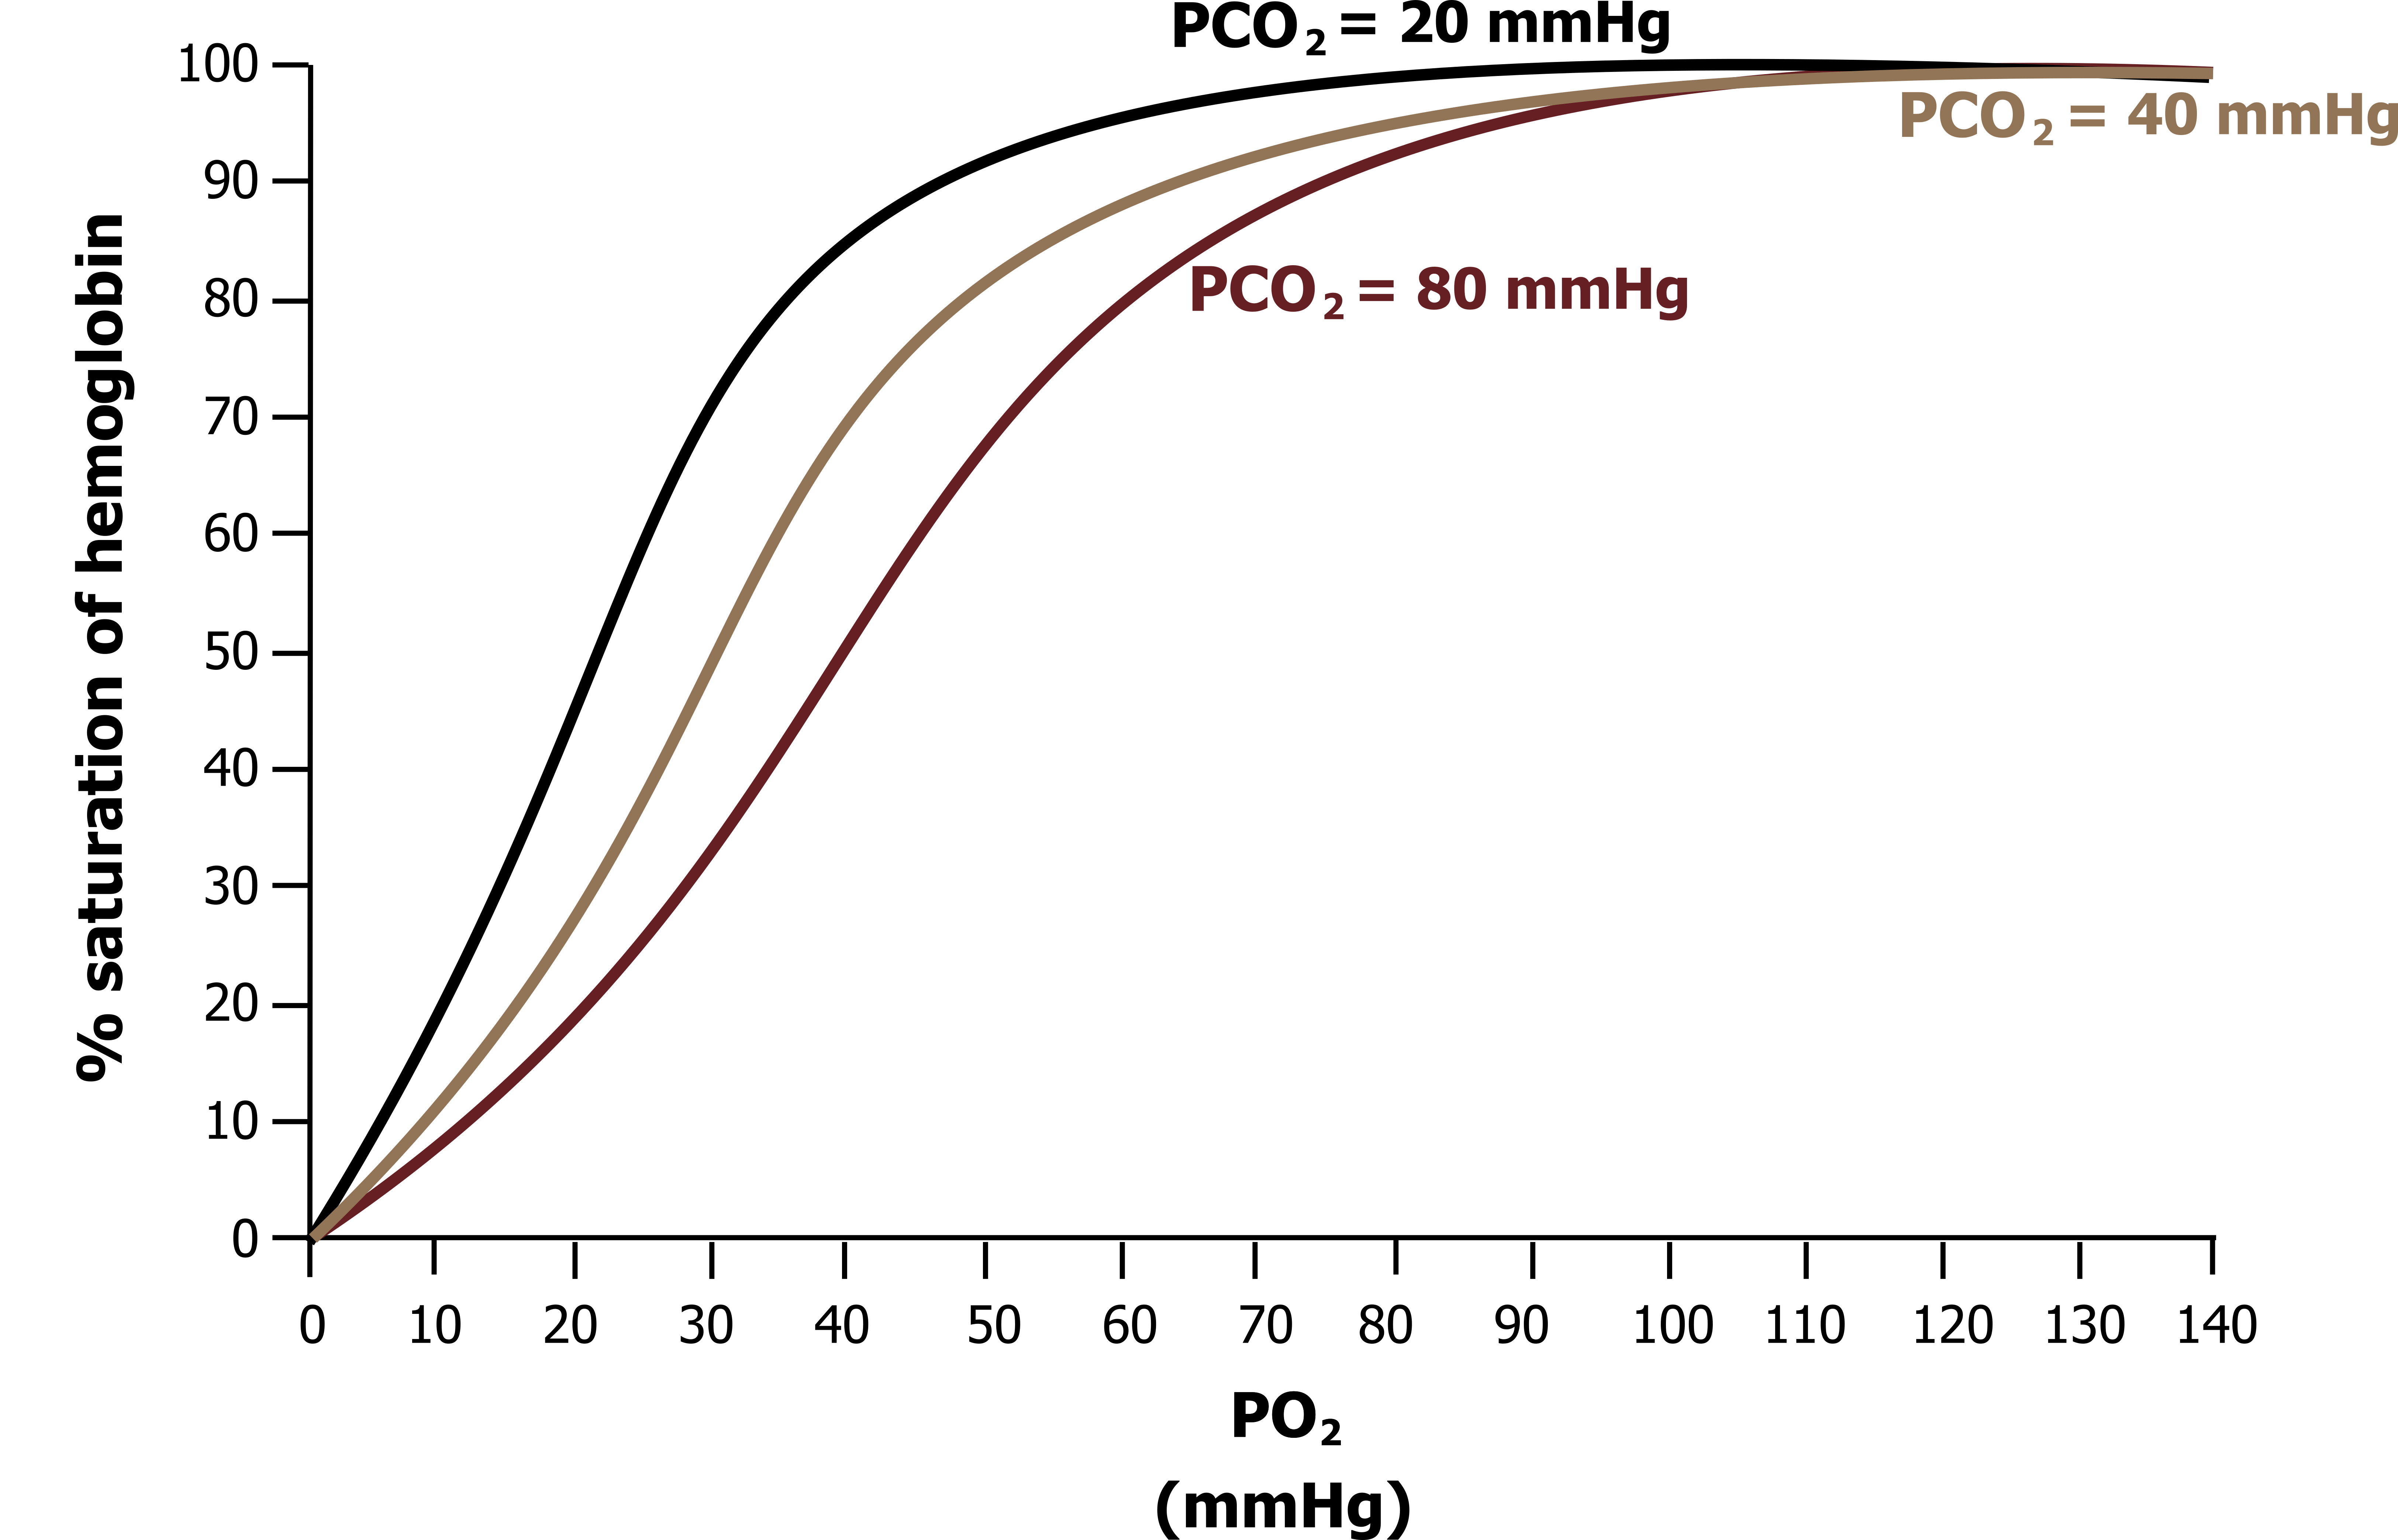 Graph with y-axis labeled % saturation of hemoglobin ranging from 0 to 100 and x-axis labeled P O2 (mmHg) ranging from 0 to 140. Oxyhemoglobin dissociation at 38℃. 3 curves labeled with different P CO2 values spaced equally apart on the x-axis, all beginning at (0,0) and ending at (140,100). From left to right 20 mmHg, 40 mmHg, 80 mmHg. All values are approximate.